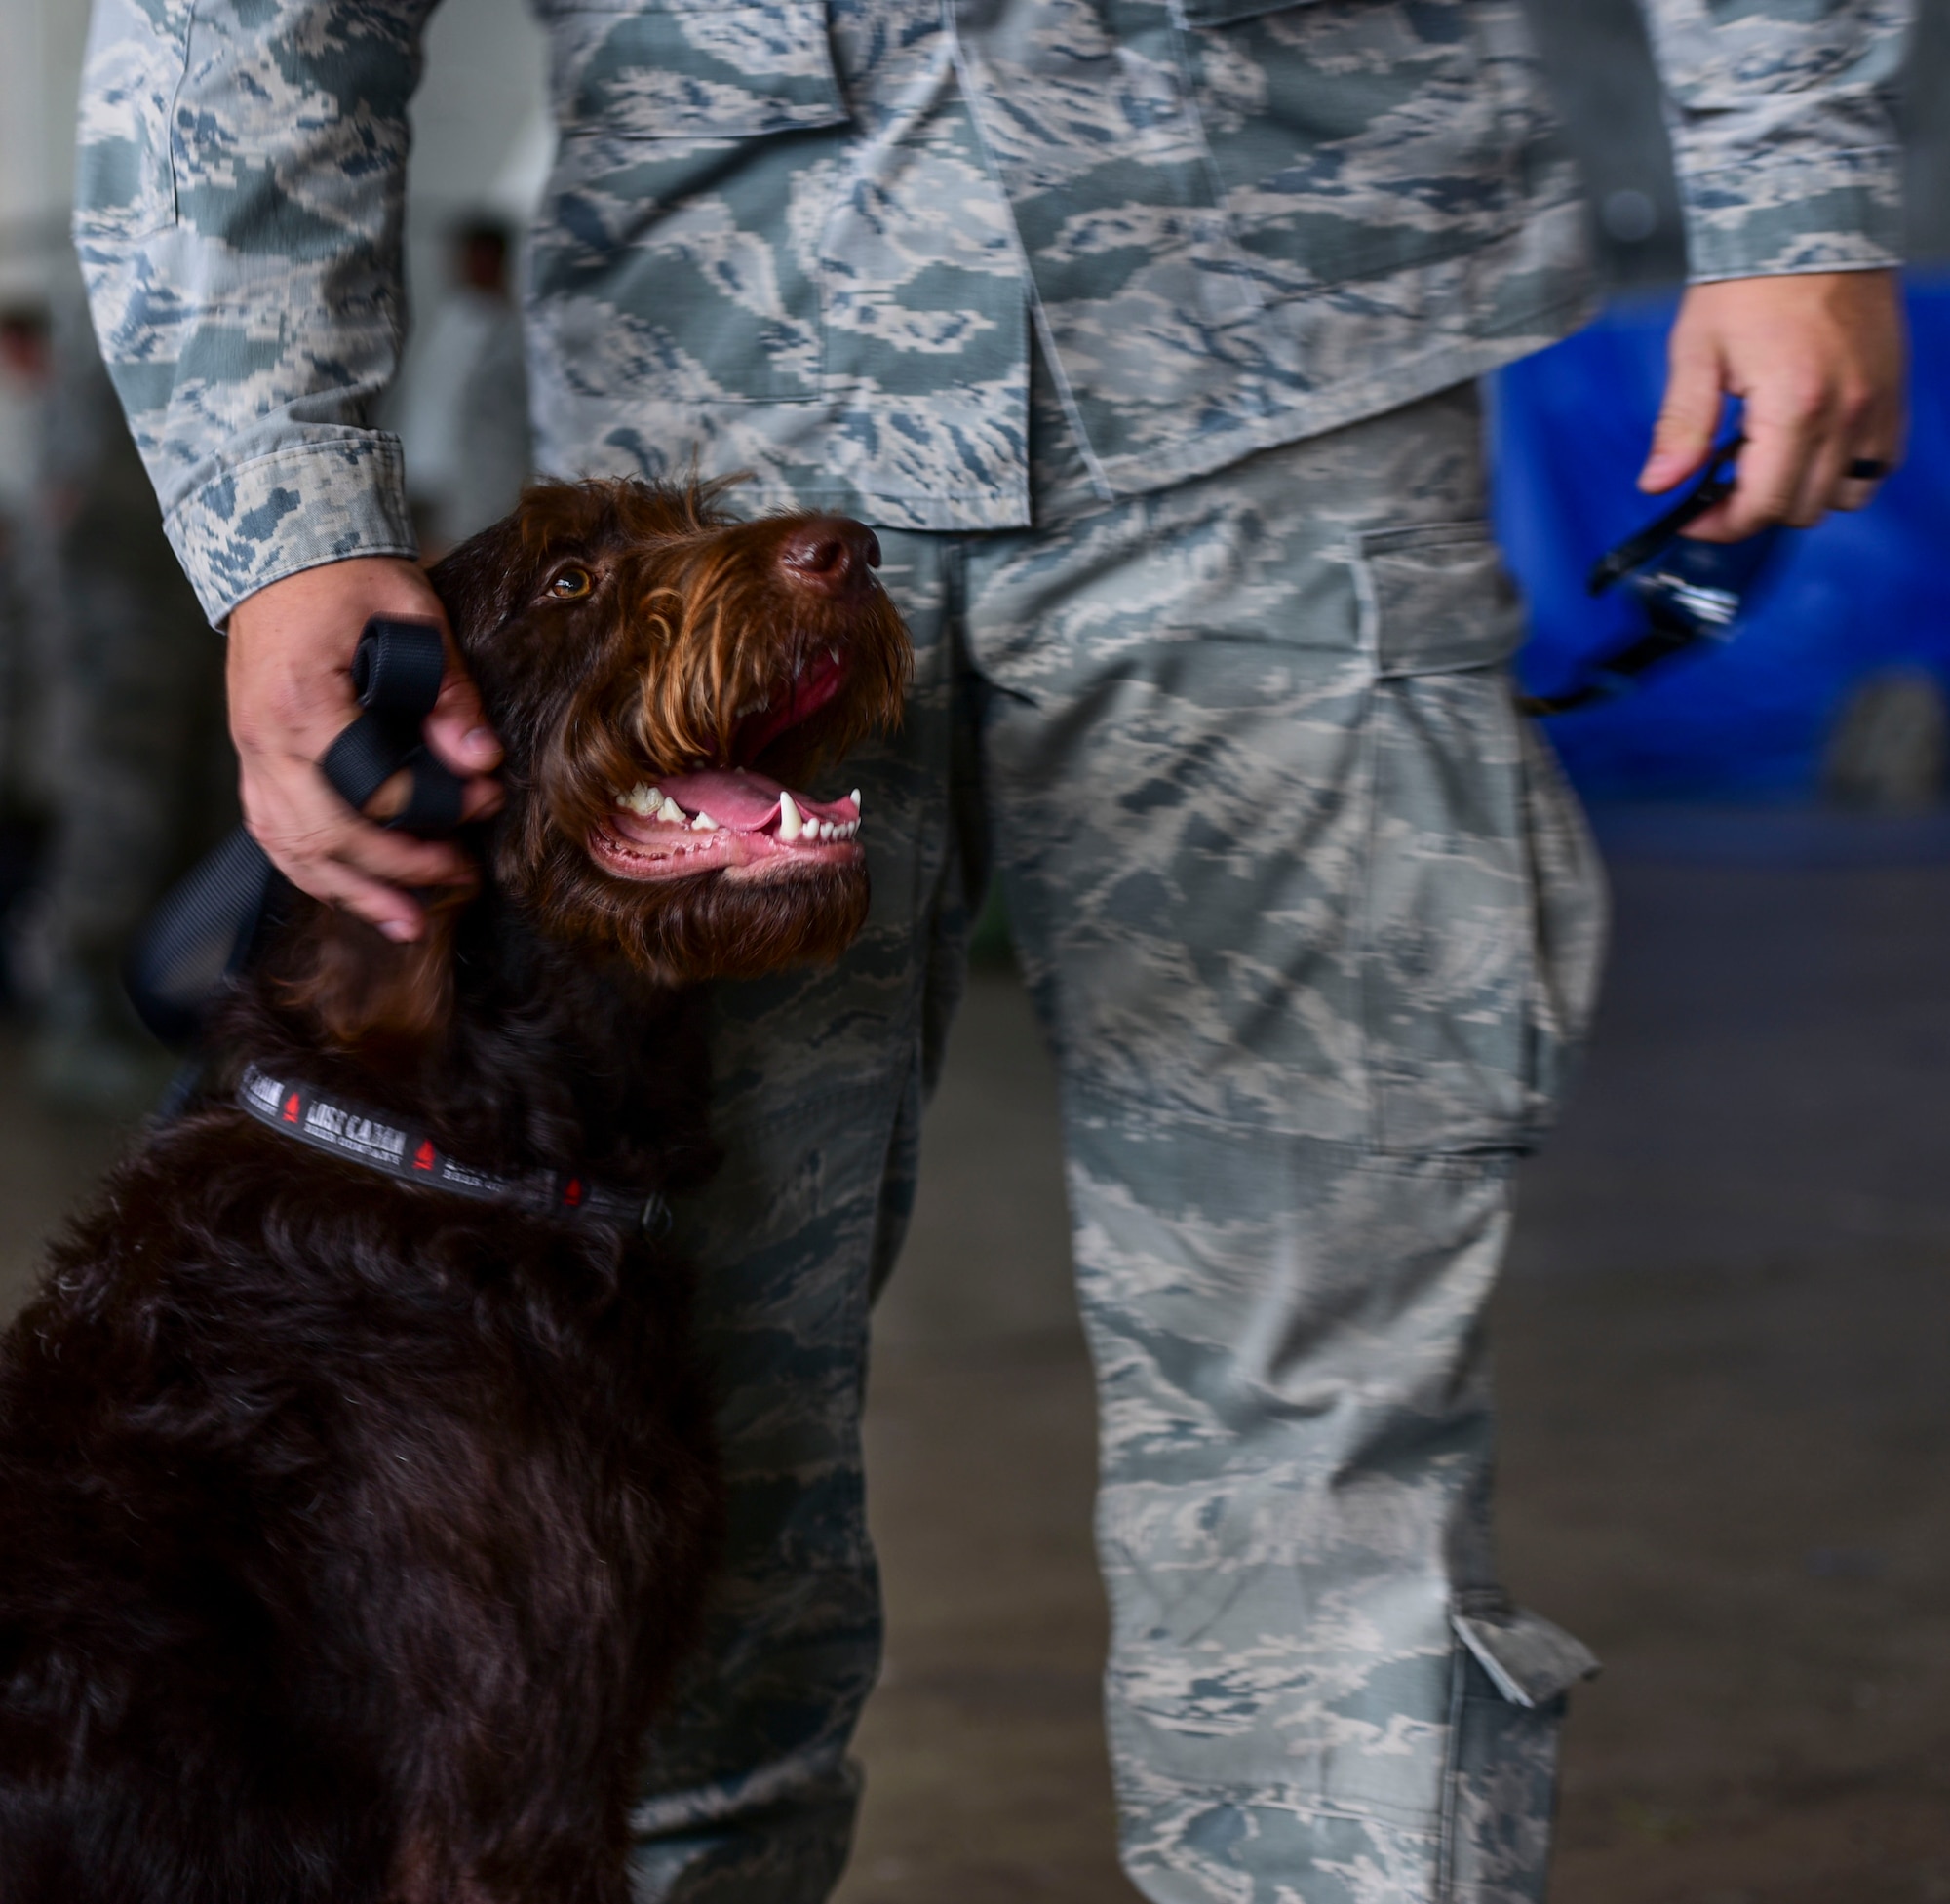 Staff Sgt. Ted Zielinski, an electronic warfare systems craftsman with the 28th Aircraft Maintenance Squadron, pets his dog, Buckley, while waiting for his luggage after returning from Red Flag 17-3, July 29, 2017. The exercise provides aircrews an opportunity to train in realistic scenarios to increase combat readiness, capability and survivability. (U.S. Air Force photo by Airman 1st Class Randahl J. Jenson)  